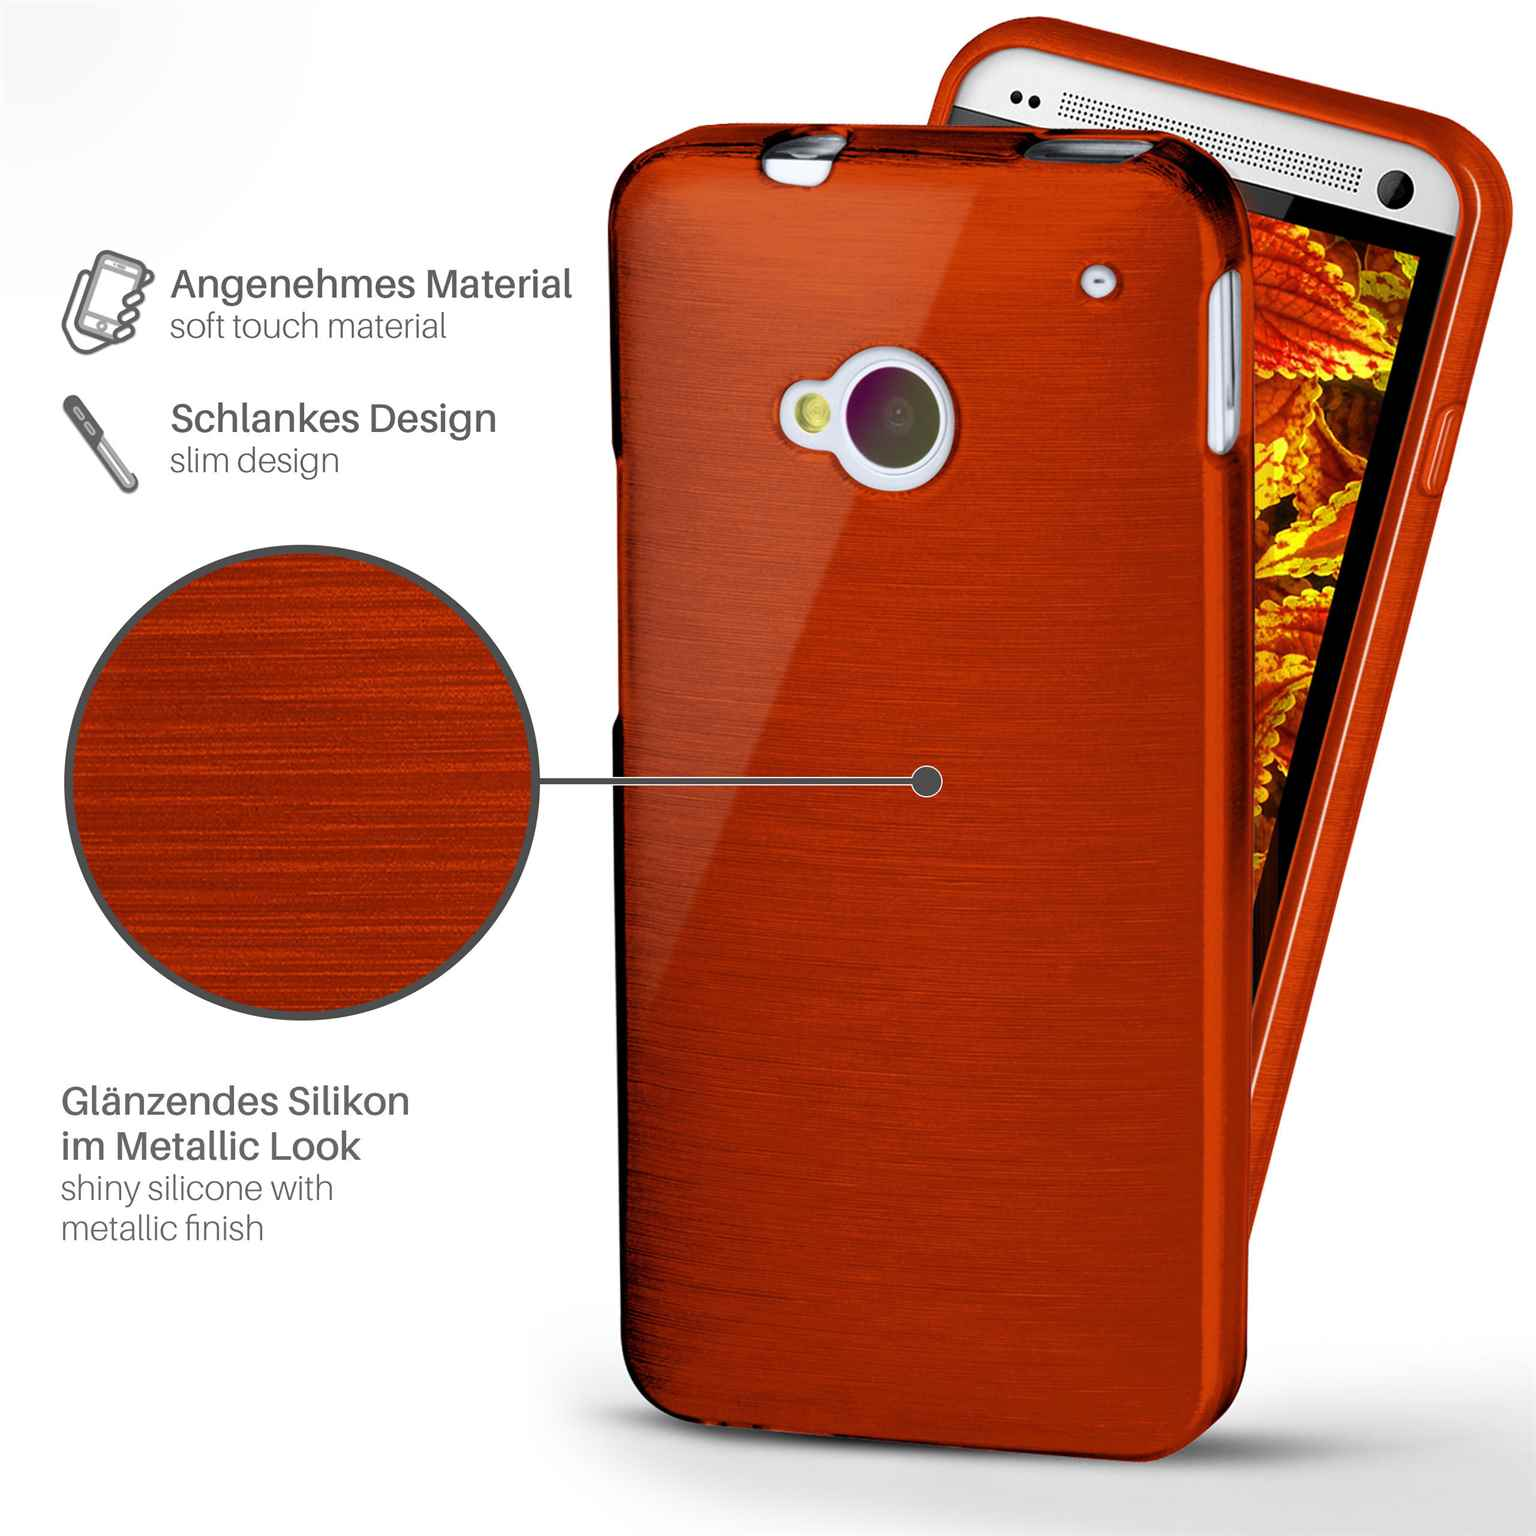 MOEX Case, One M7, Indian-Red Brushed Backcover, HTC,